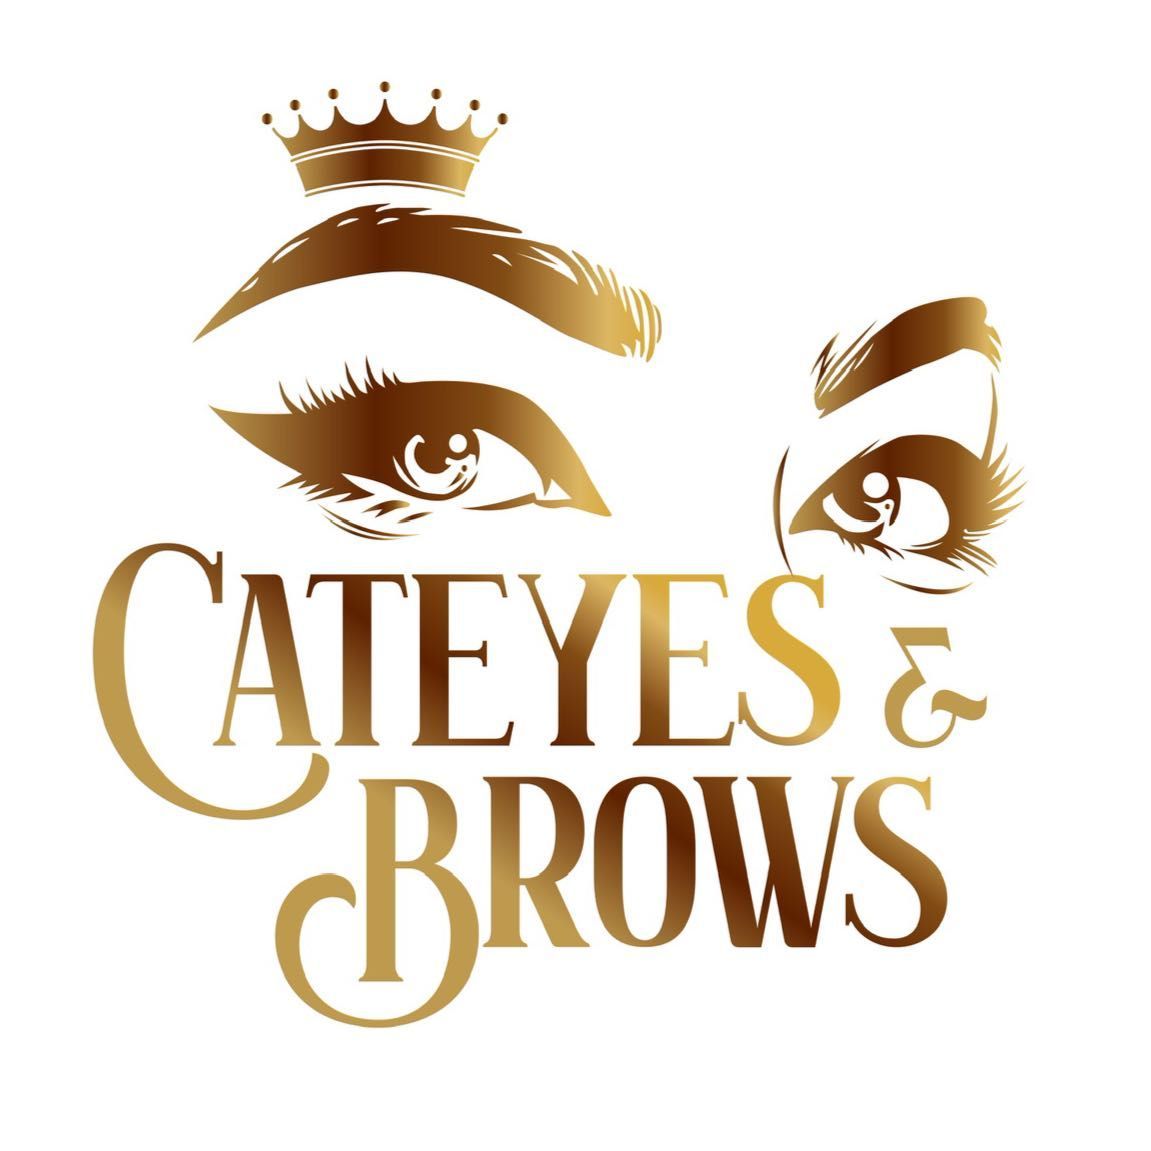 Cateyes And Brows LLC, 190 n swift rd, Addison, 60101